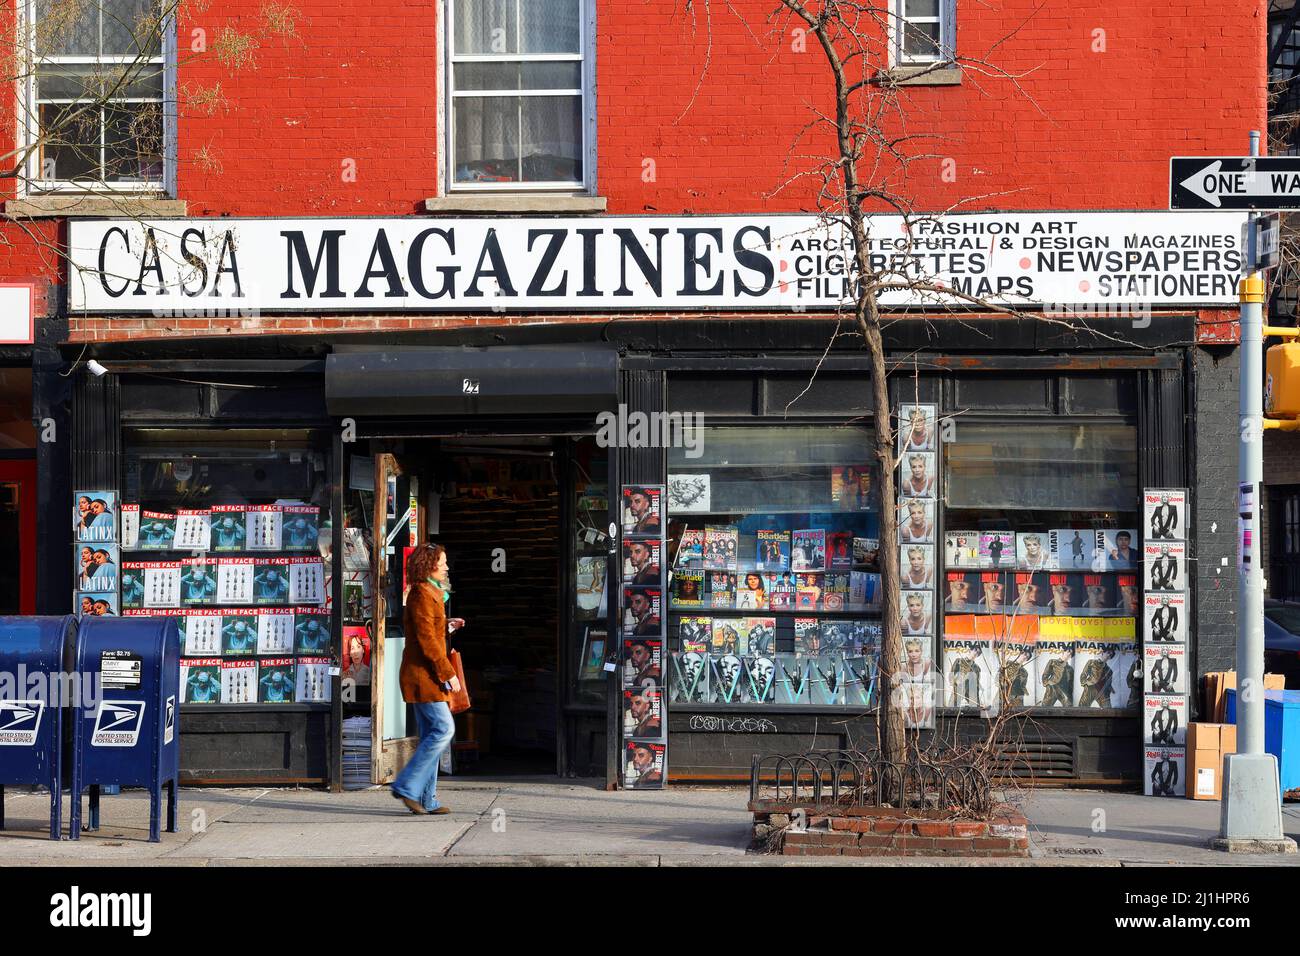 Casa Magazines, 22 8th Ave, New York, NYC storefront photo of a magazine store in the Greenwich Village neighborhood in Manhattan. Stock Photo